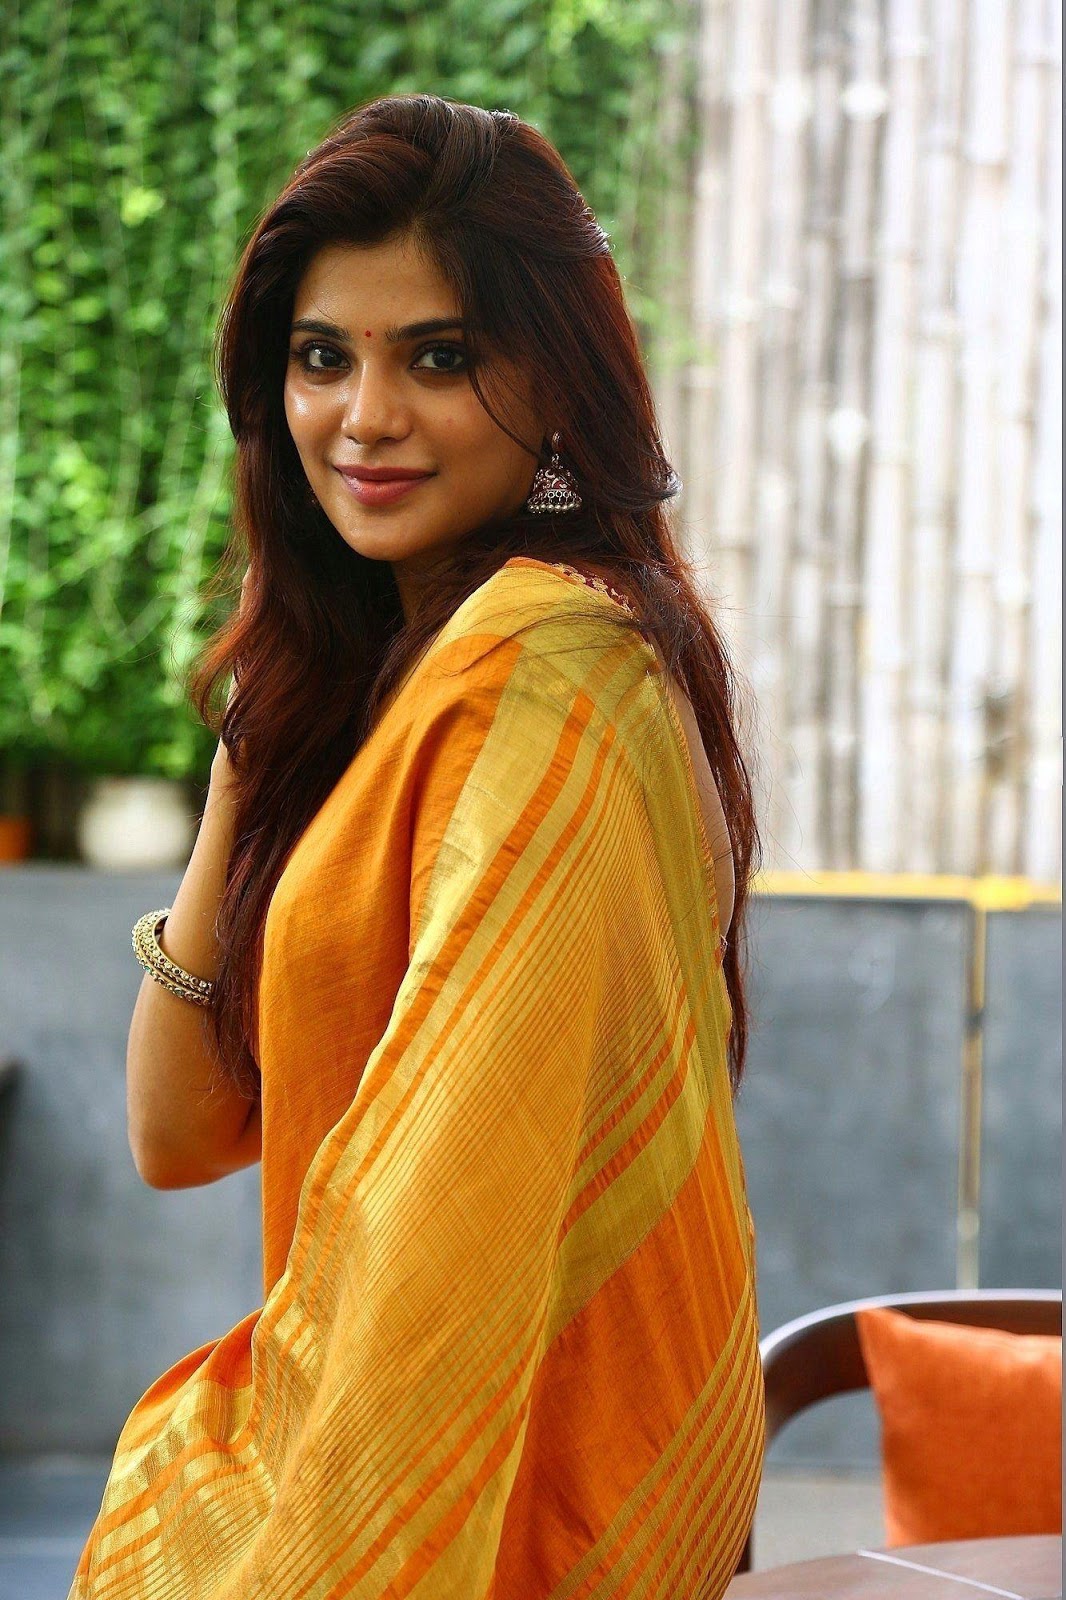 Actress Aathmika Aka Latest Photo Stills Latest Indian Hollywood Movies Updates Branding Online And Actress Gallery Checkout aathmika age, wiki, biography, instagram, movies, photos and family. actress aathmika aka latest photo